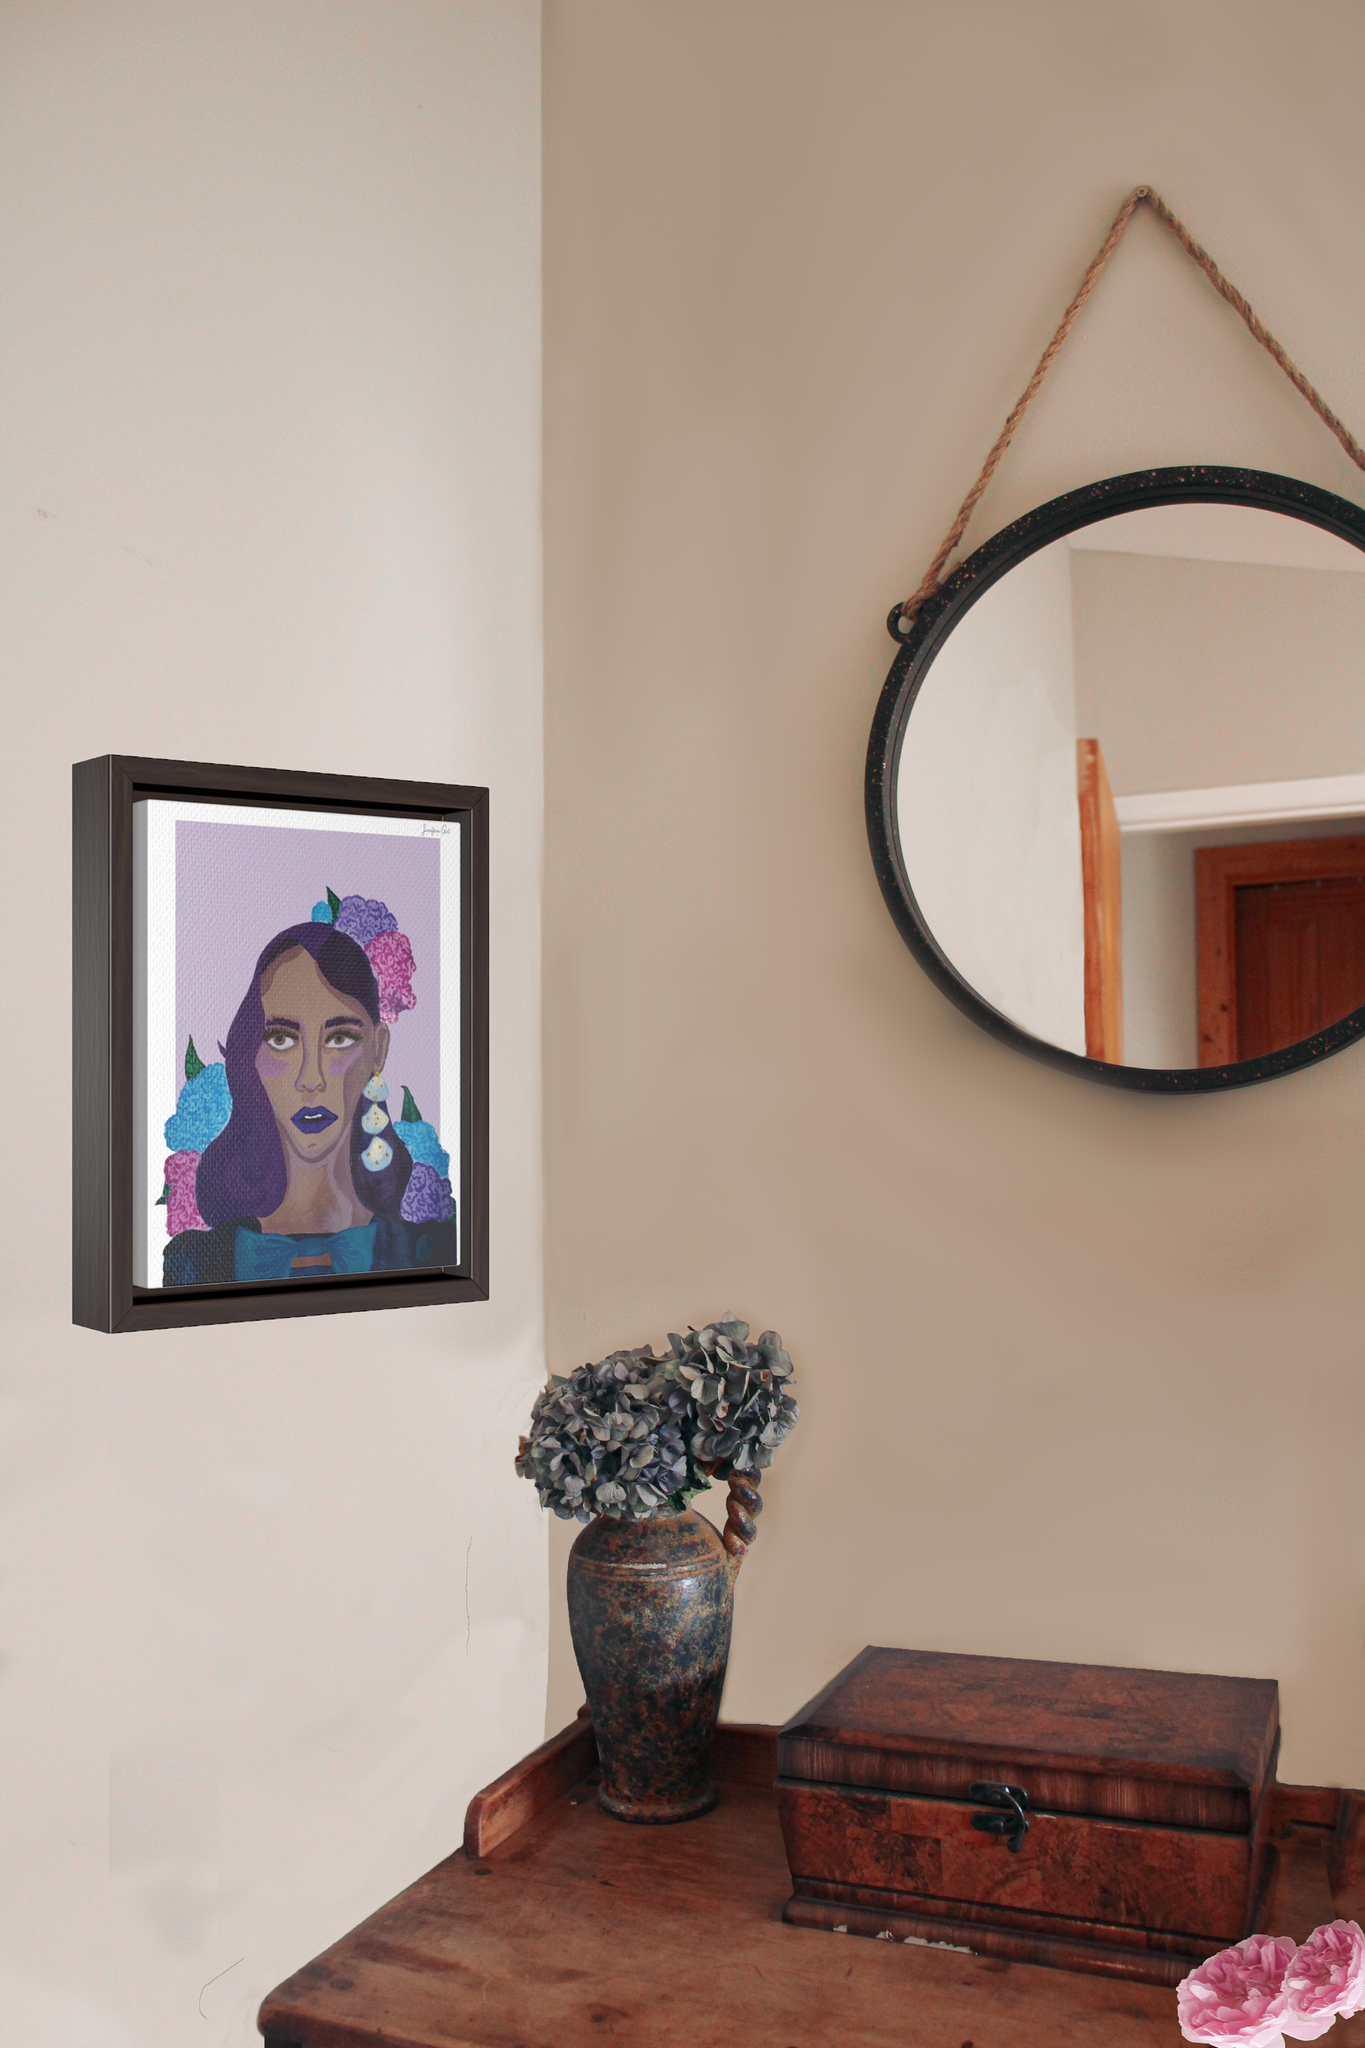 A framed canvas illustration of a Black woman painted in purple hues and wearing a blue dress with a blow in front and hydrangea flowers in her hair, hanging on a wall next to a circle mirror and a wood desk with a flower vase and jewelry box